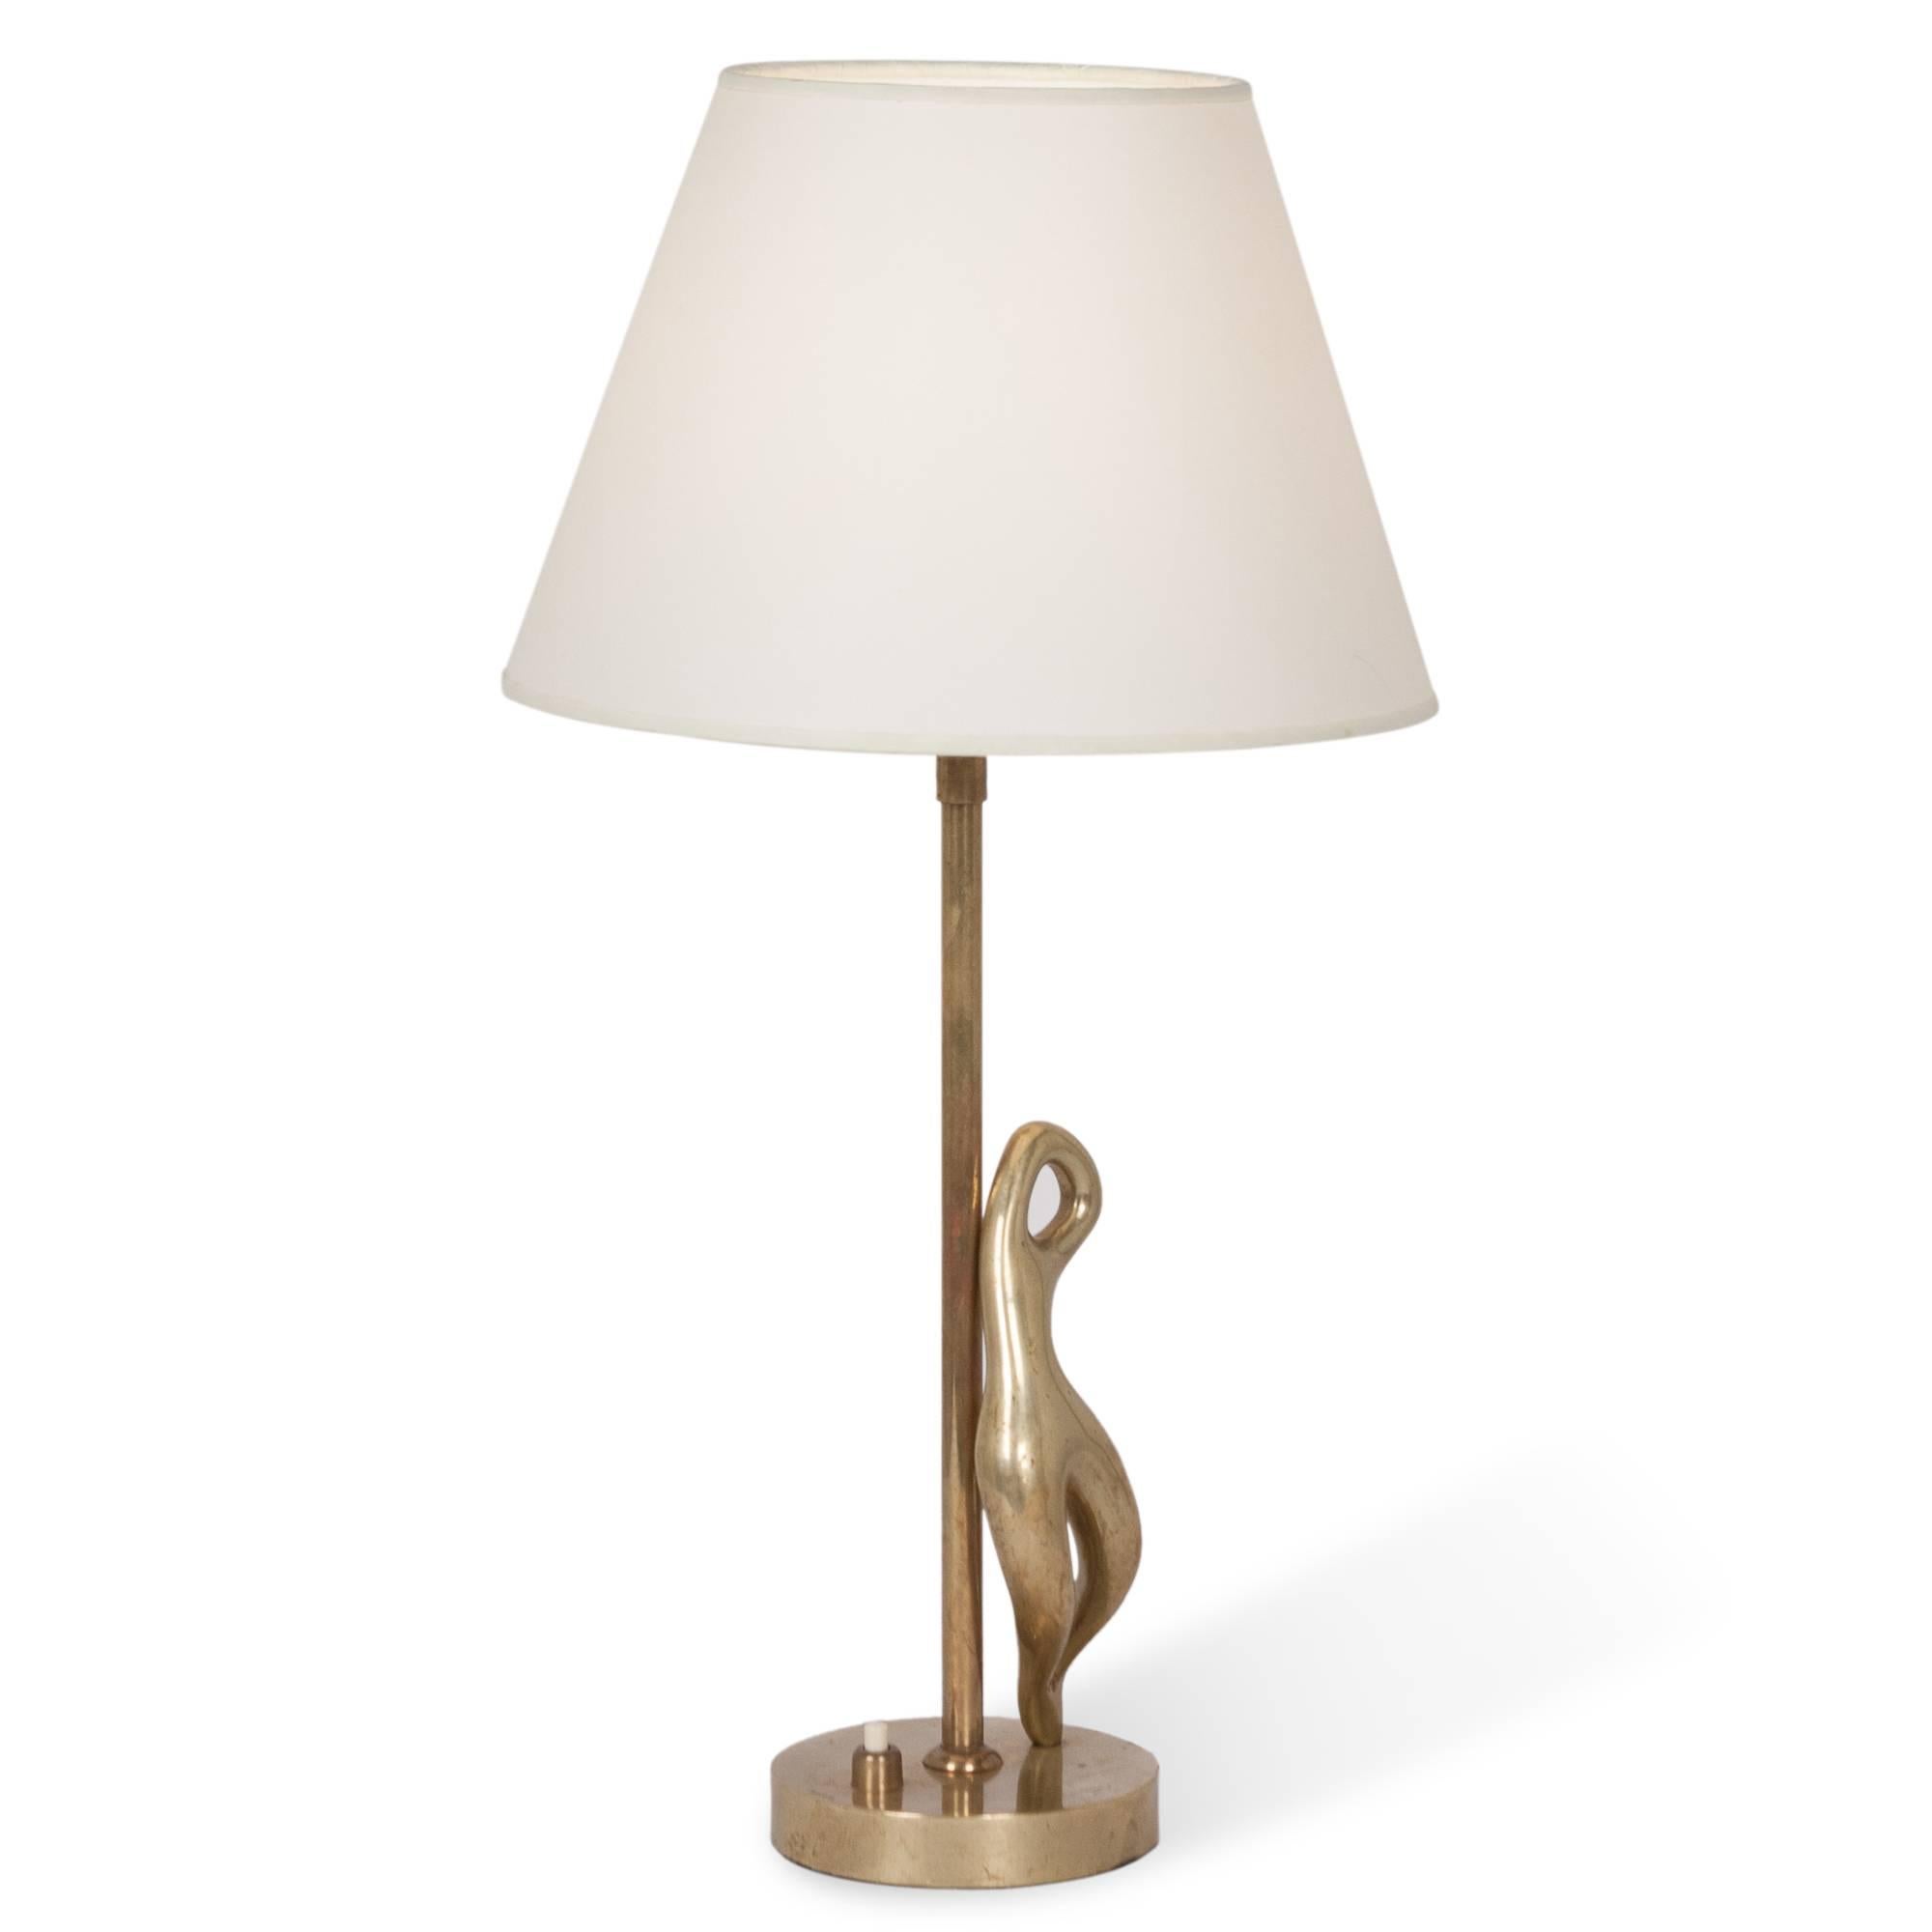 British Abstract Bronze Figure Table Lamp, 1950s, by Ricardo Scarpa For Sale